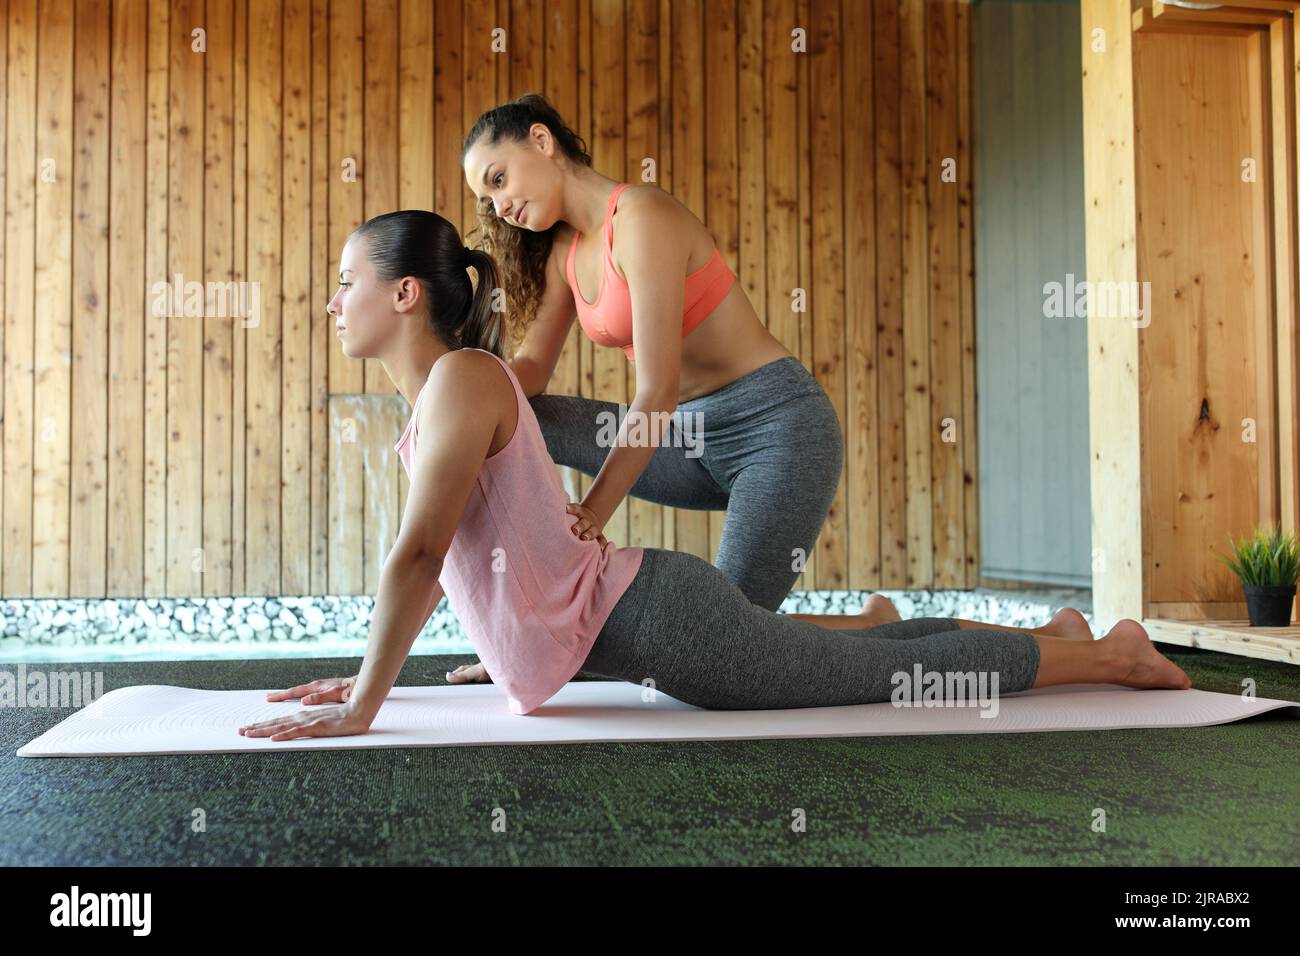 Woman teaching yoga and student learning in spa interior Stock Photo